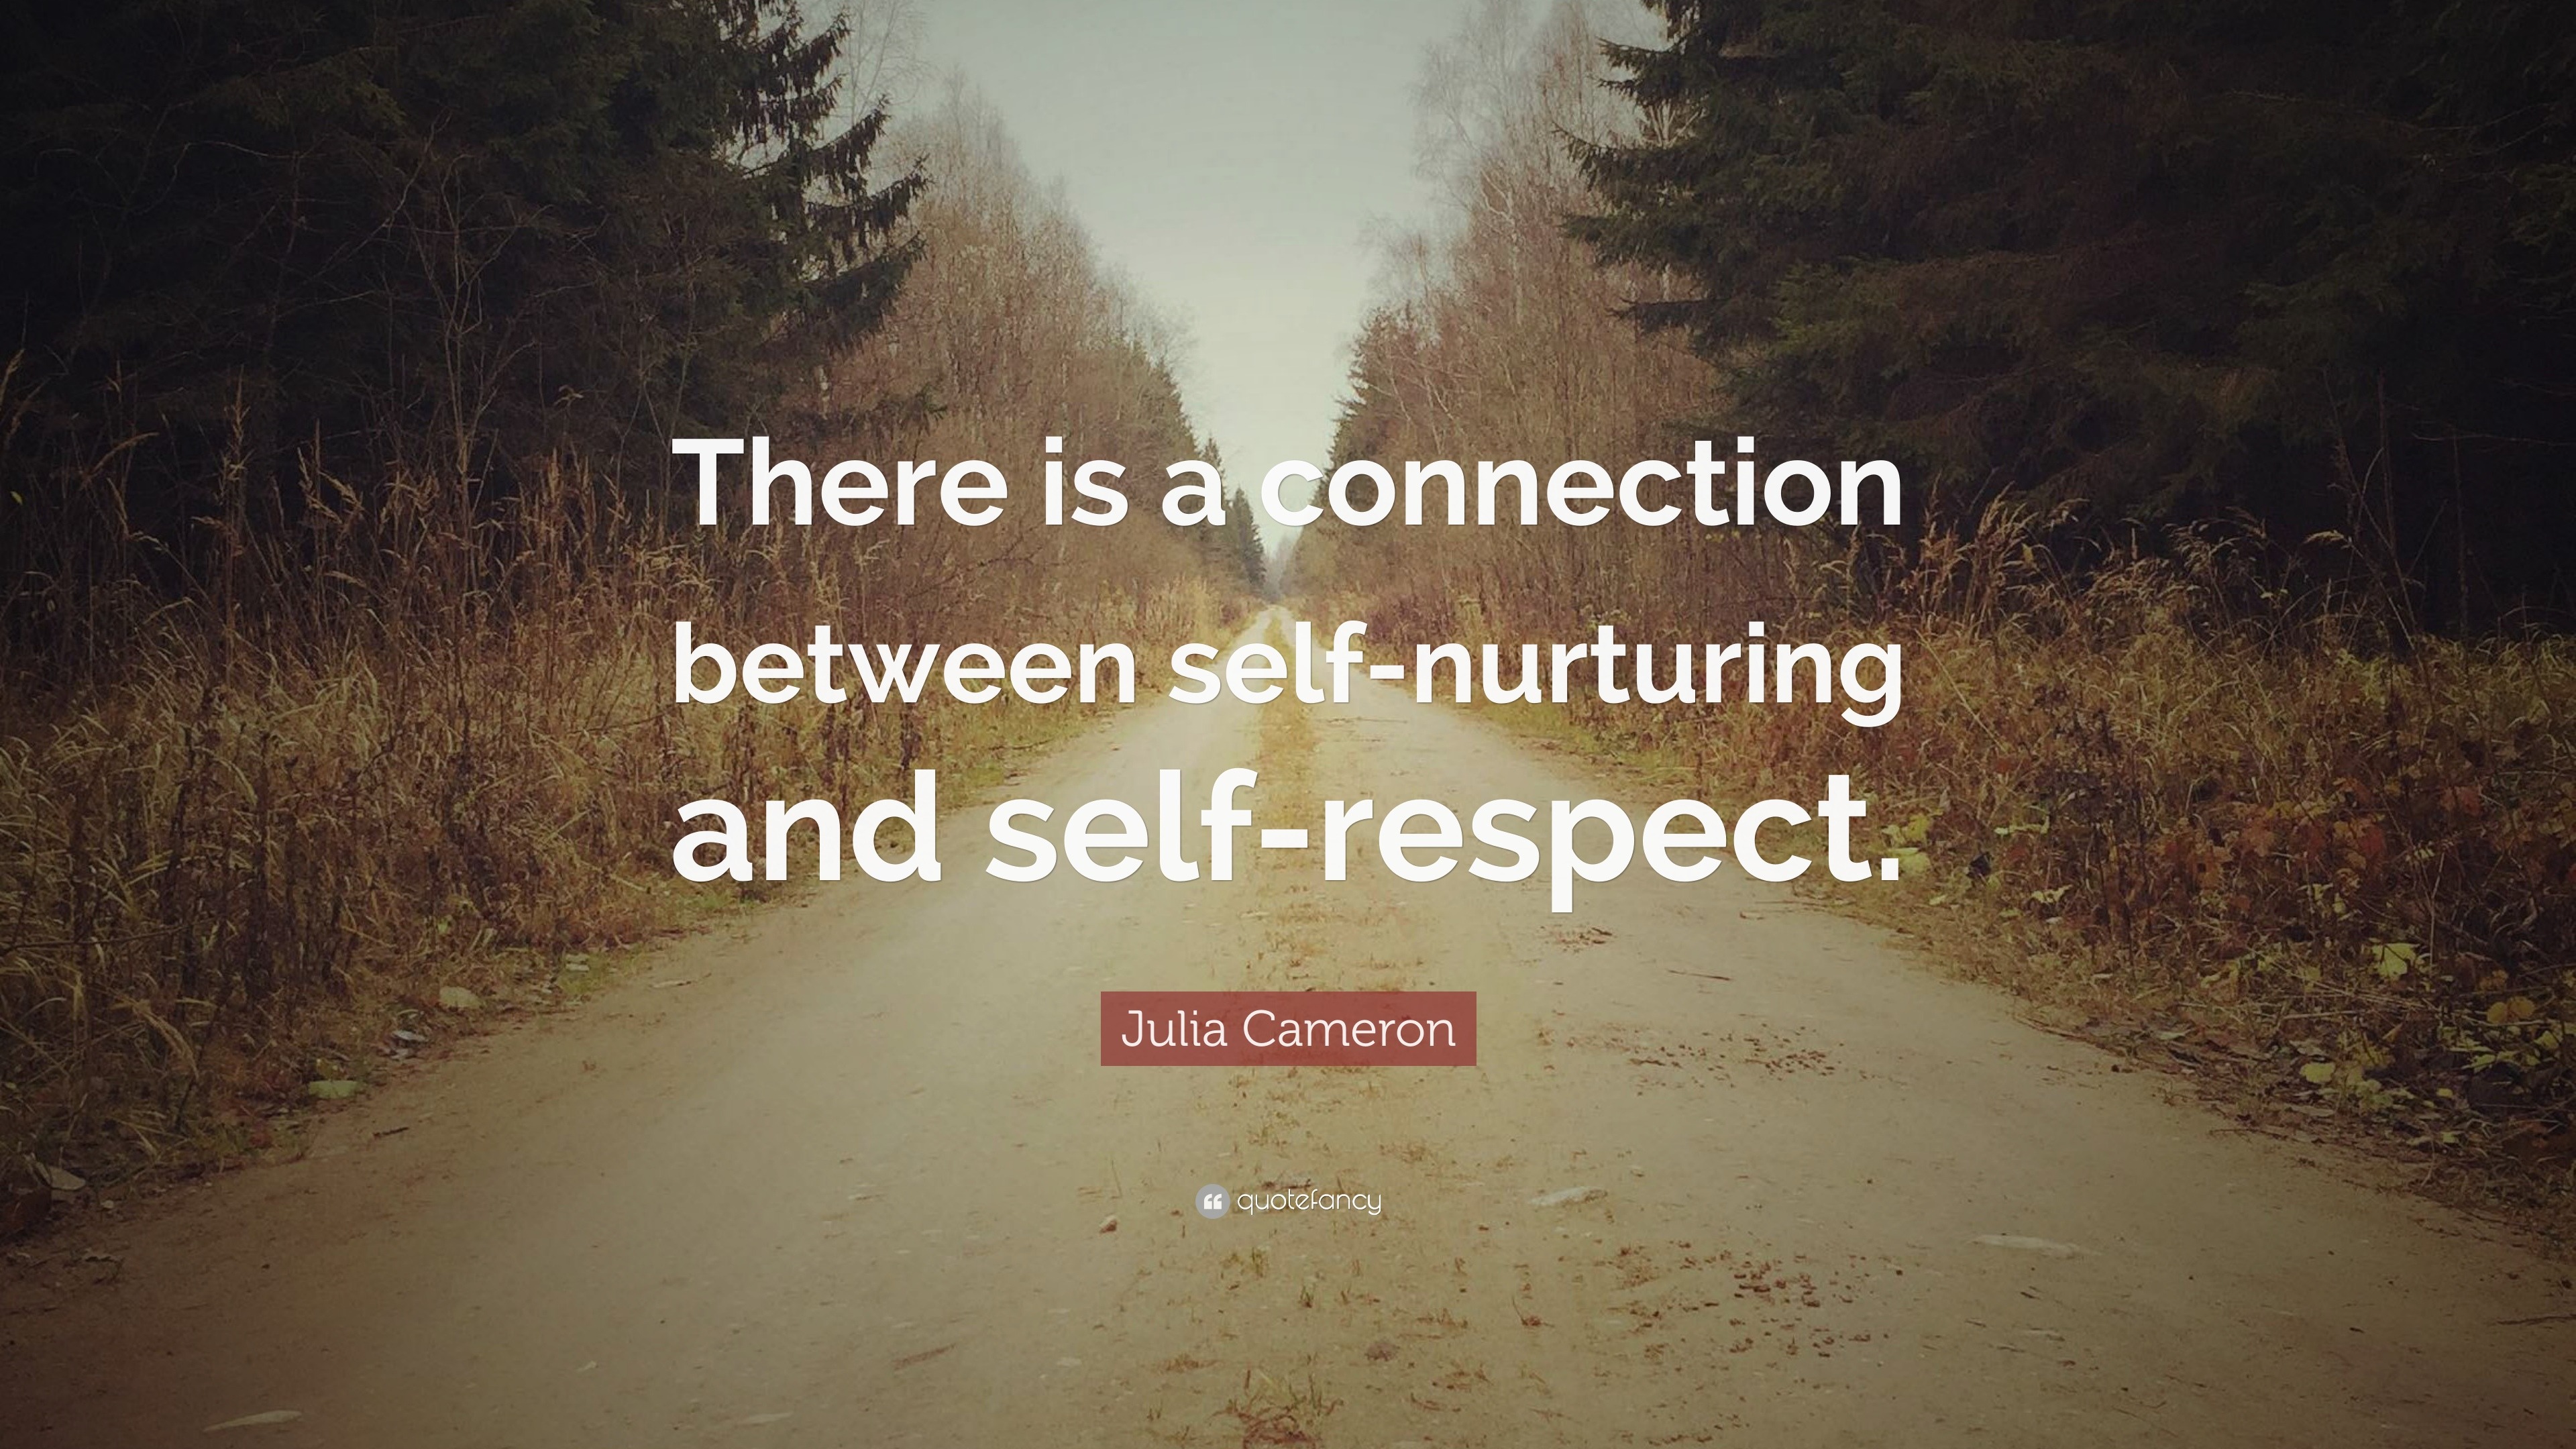 Julia Cameron Quote: “There is a connection between self-nurturing and